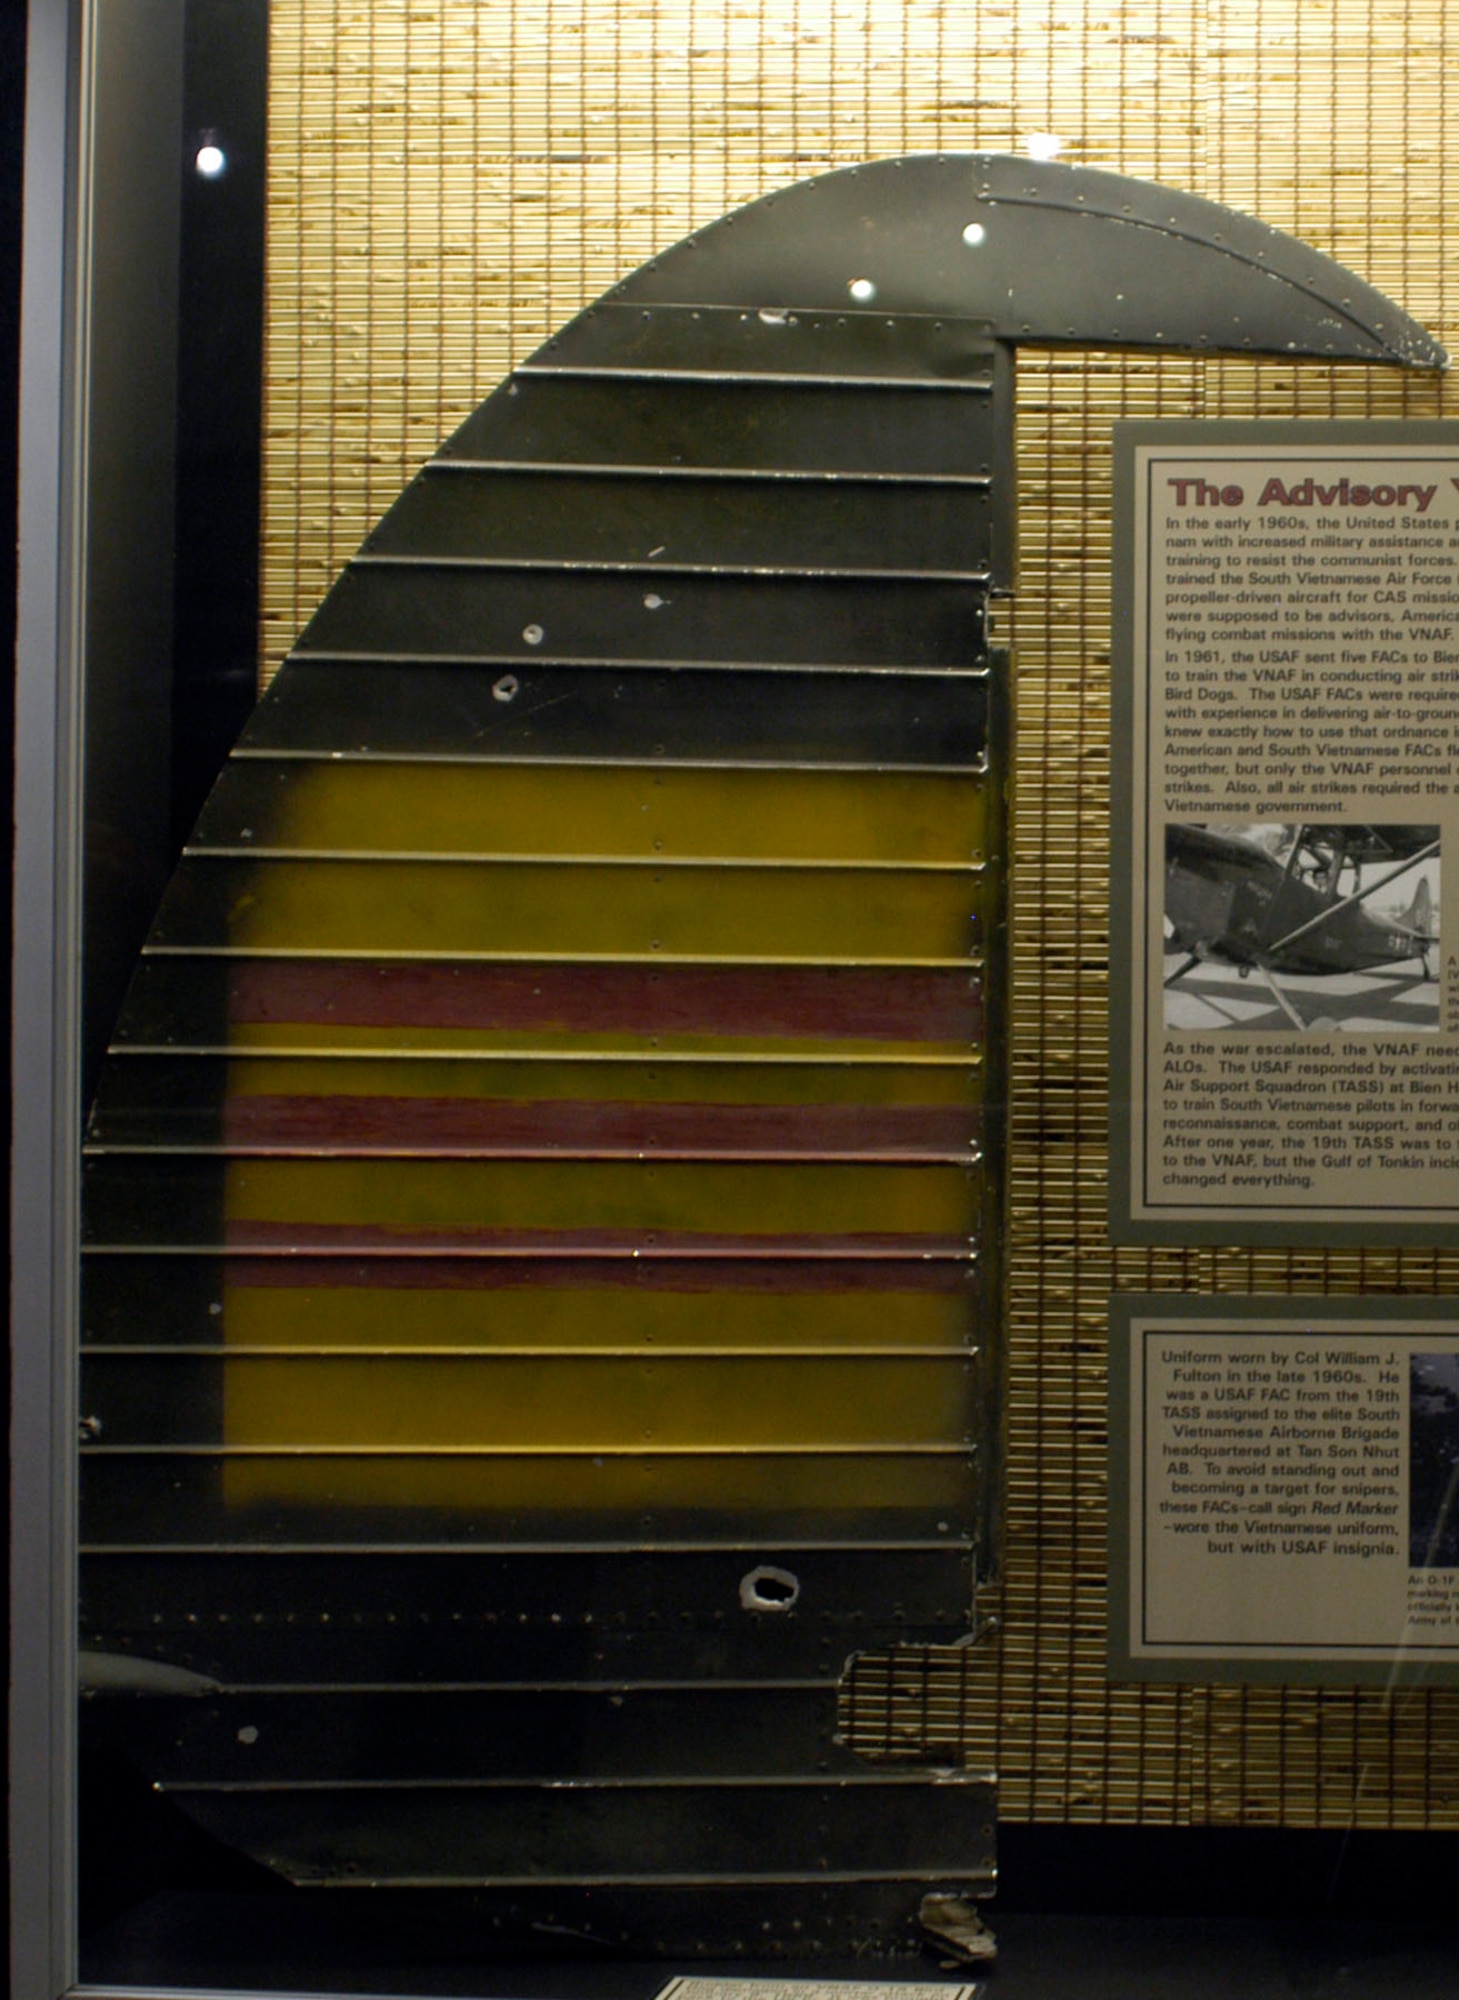 DAYTON, Ohio - Rudder from an VNAF O-1A Bird Dog damaged in a mortar attack on Jan. 9, 1968. This item is on display in the A Dangerous Business: Forward Air Control exhibit in the Southeast Asia War Gallery at the National Museum of the U.S. Air Force. (U.S. Air Force photo)
 